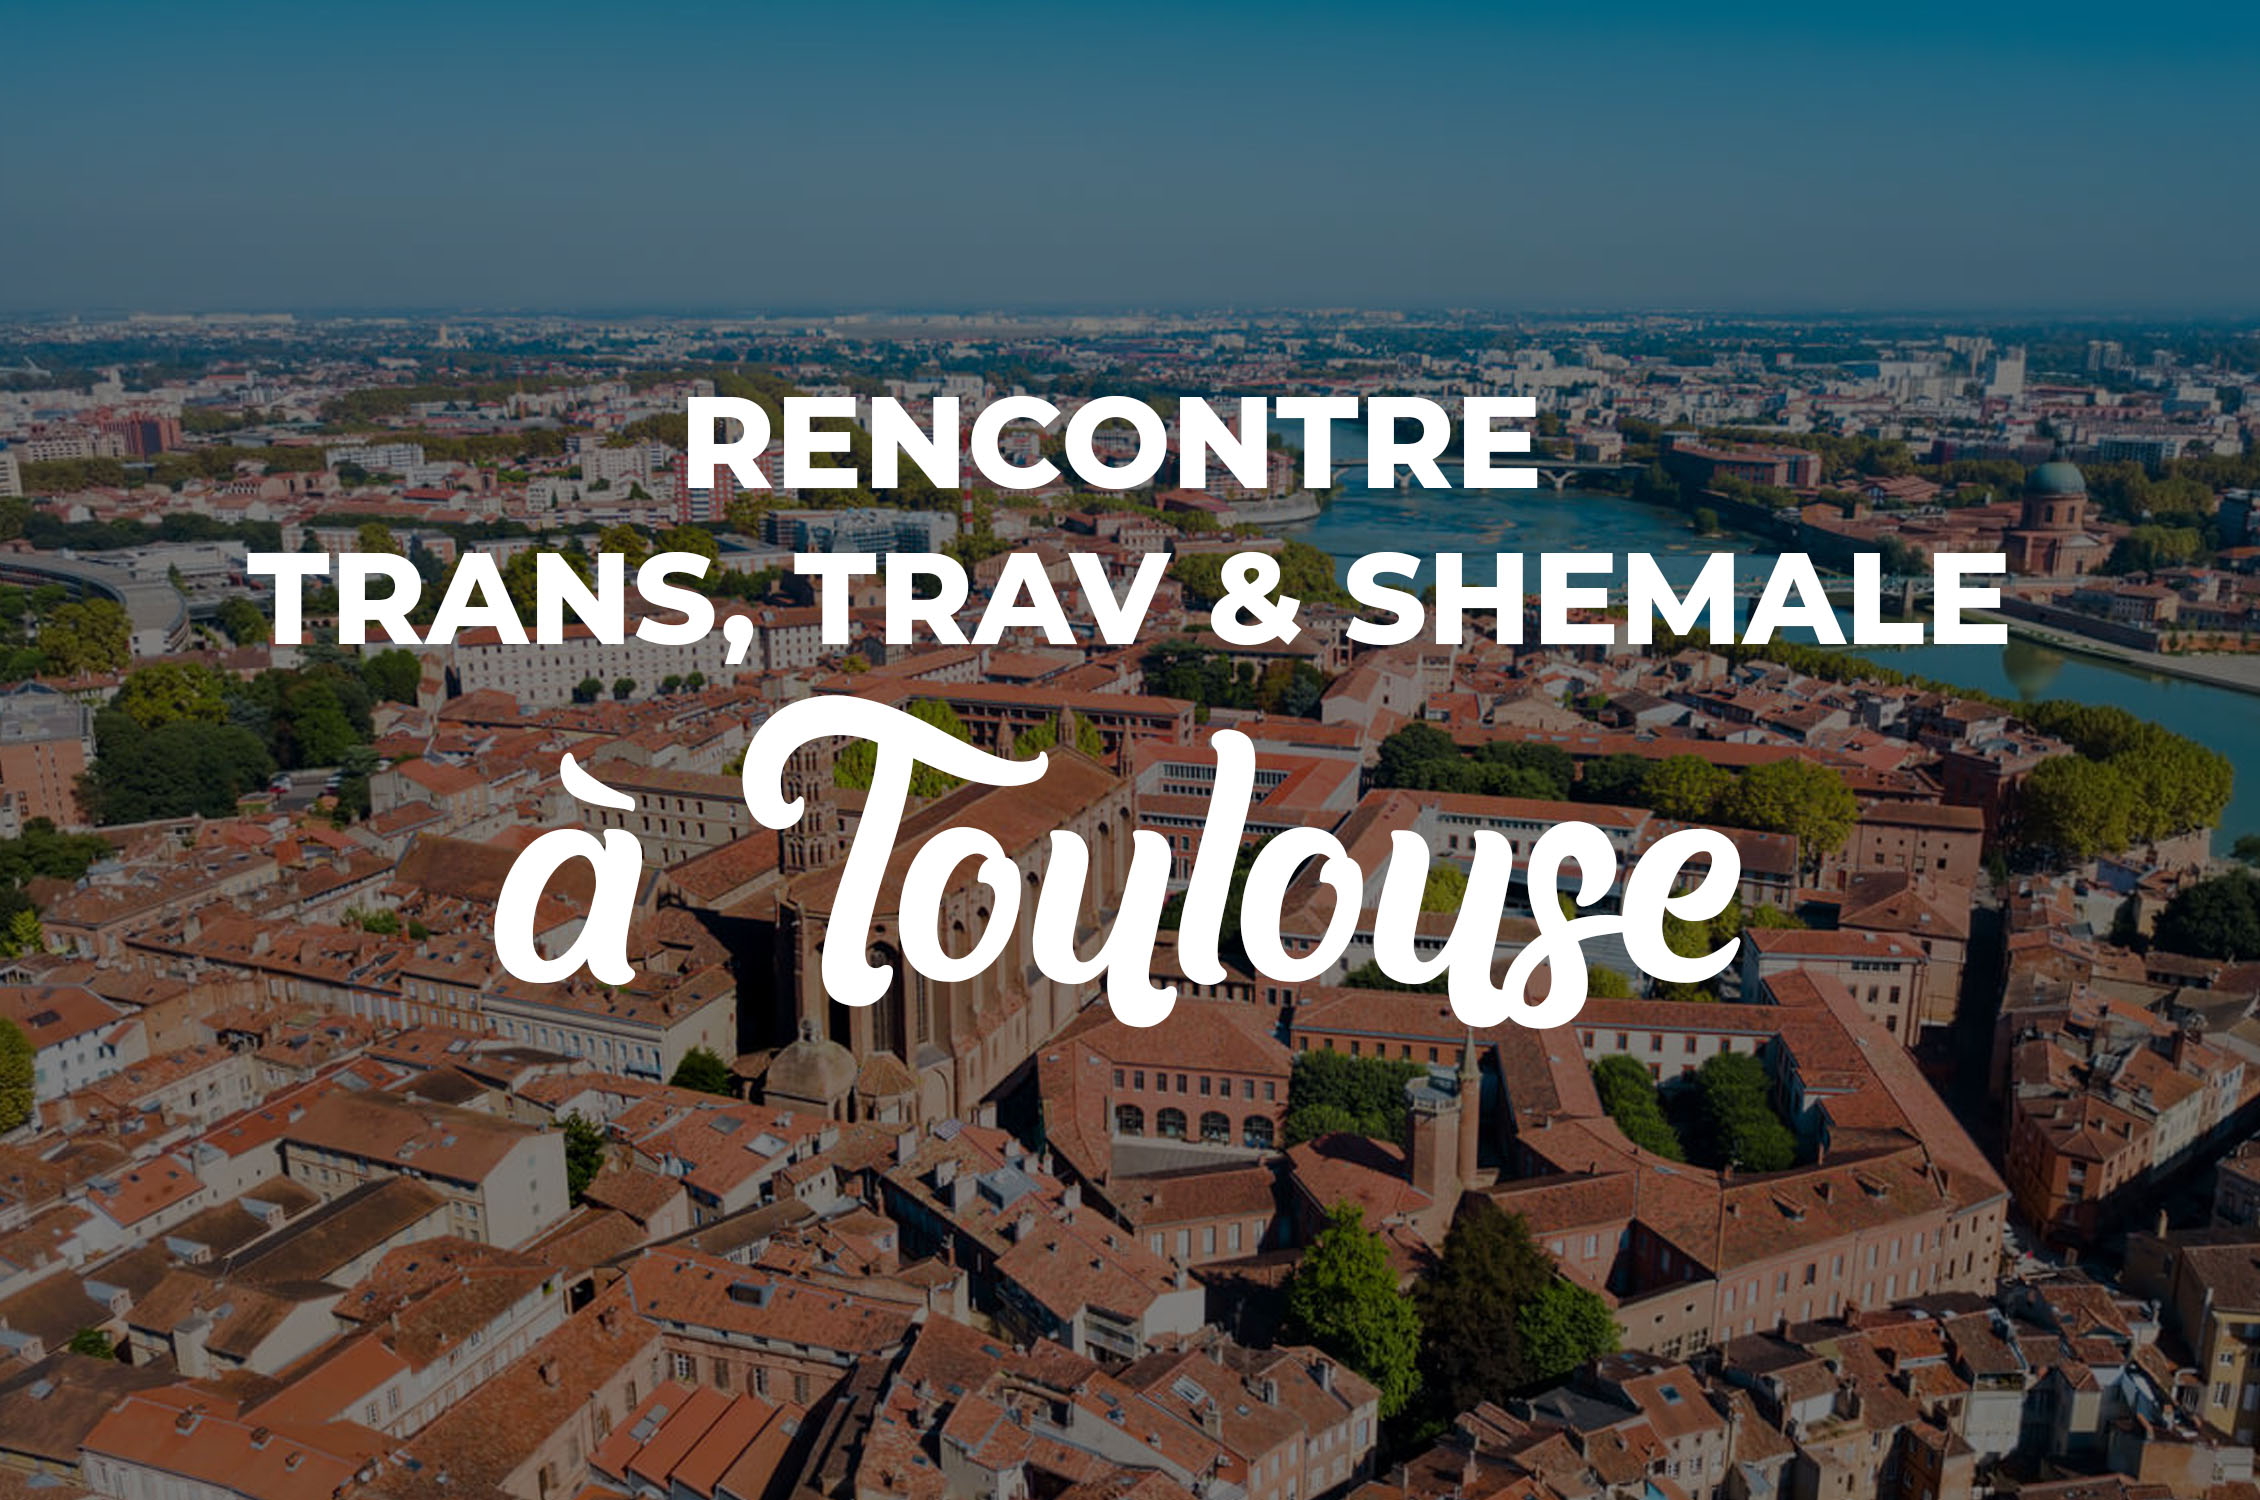 rencontre trans shemale toulouse